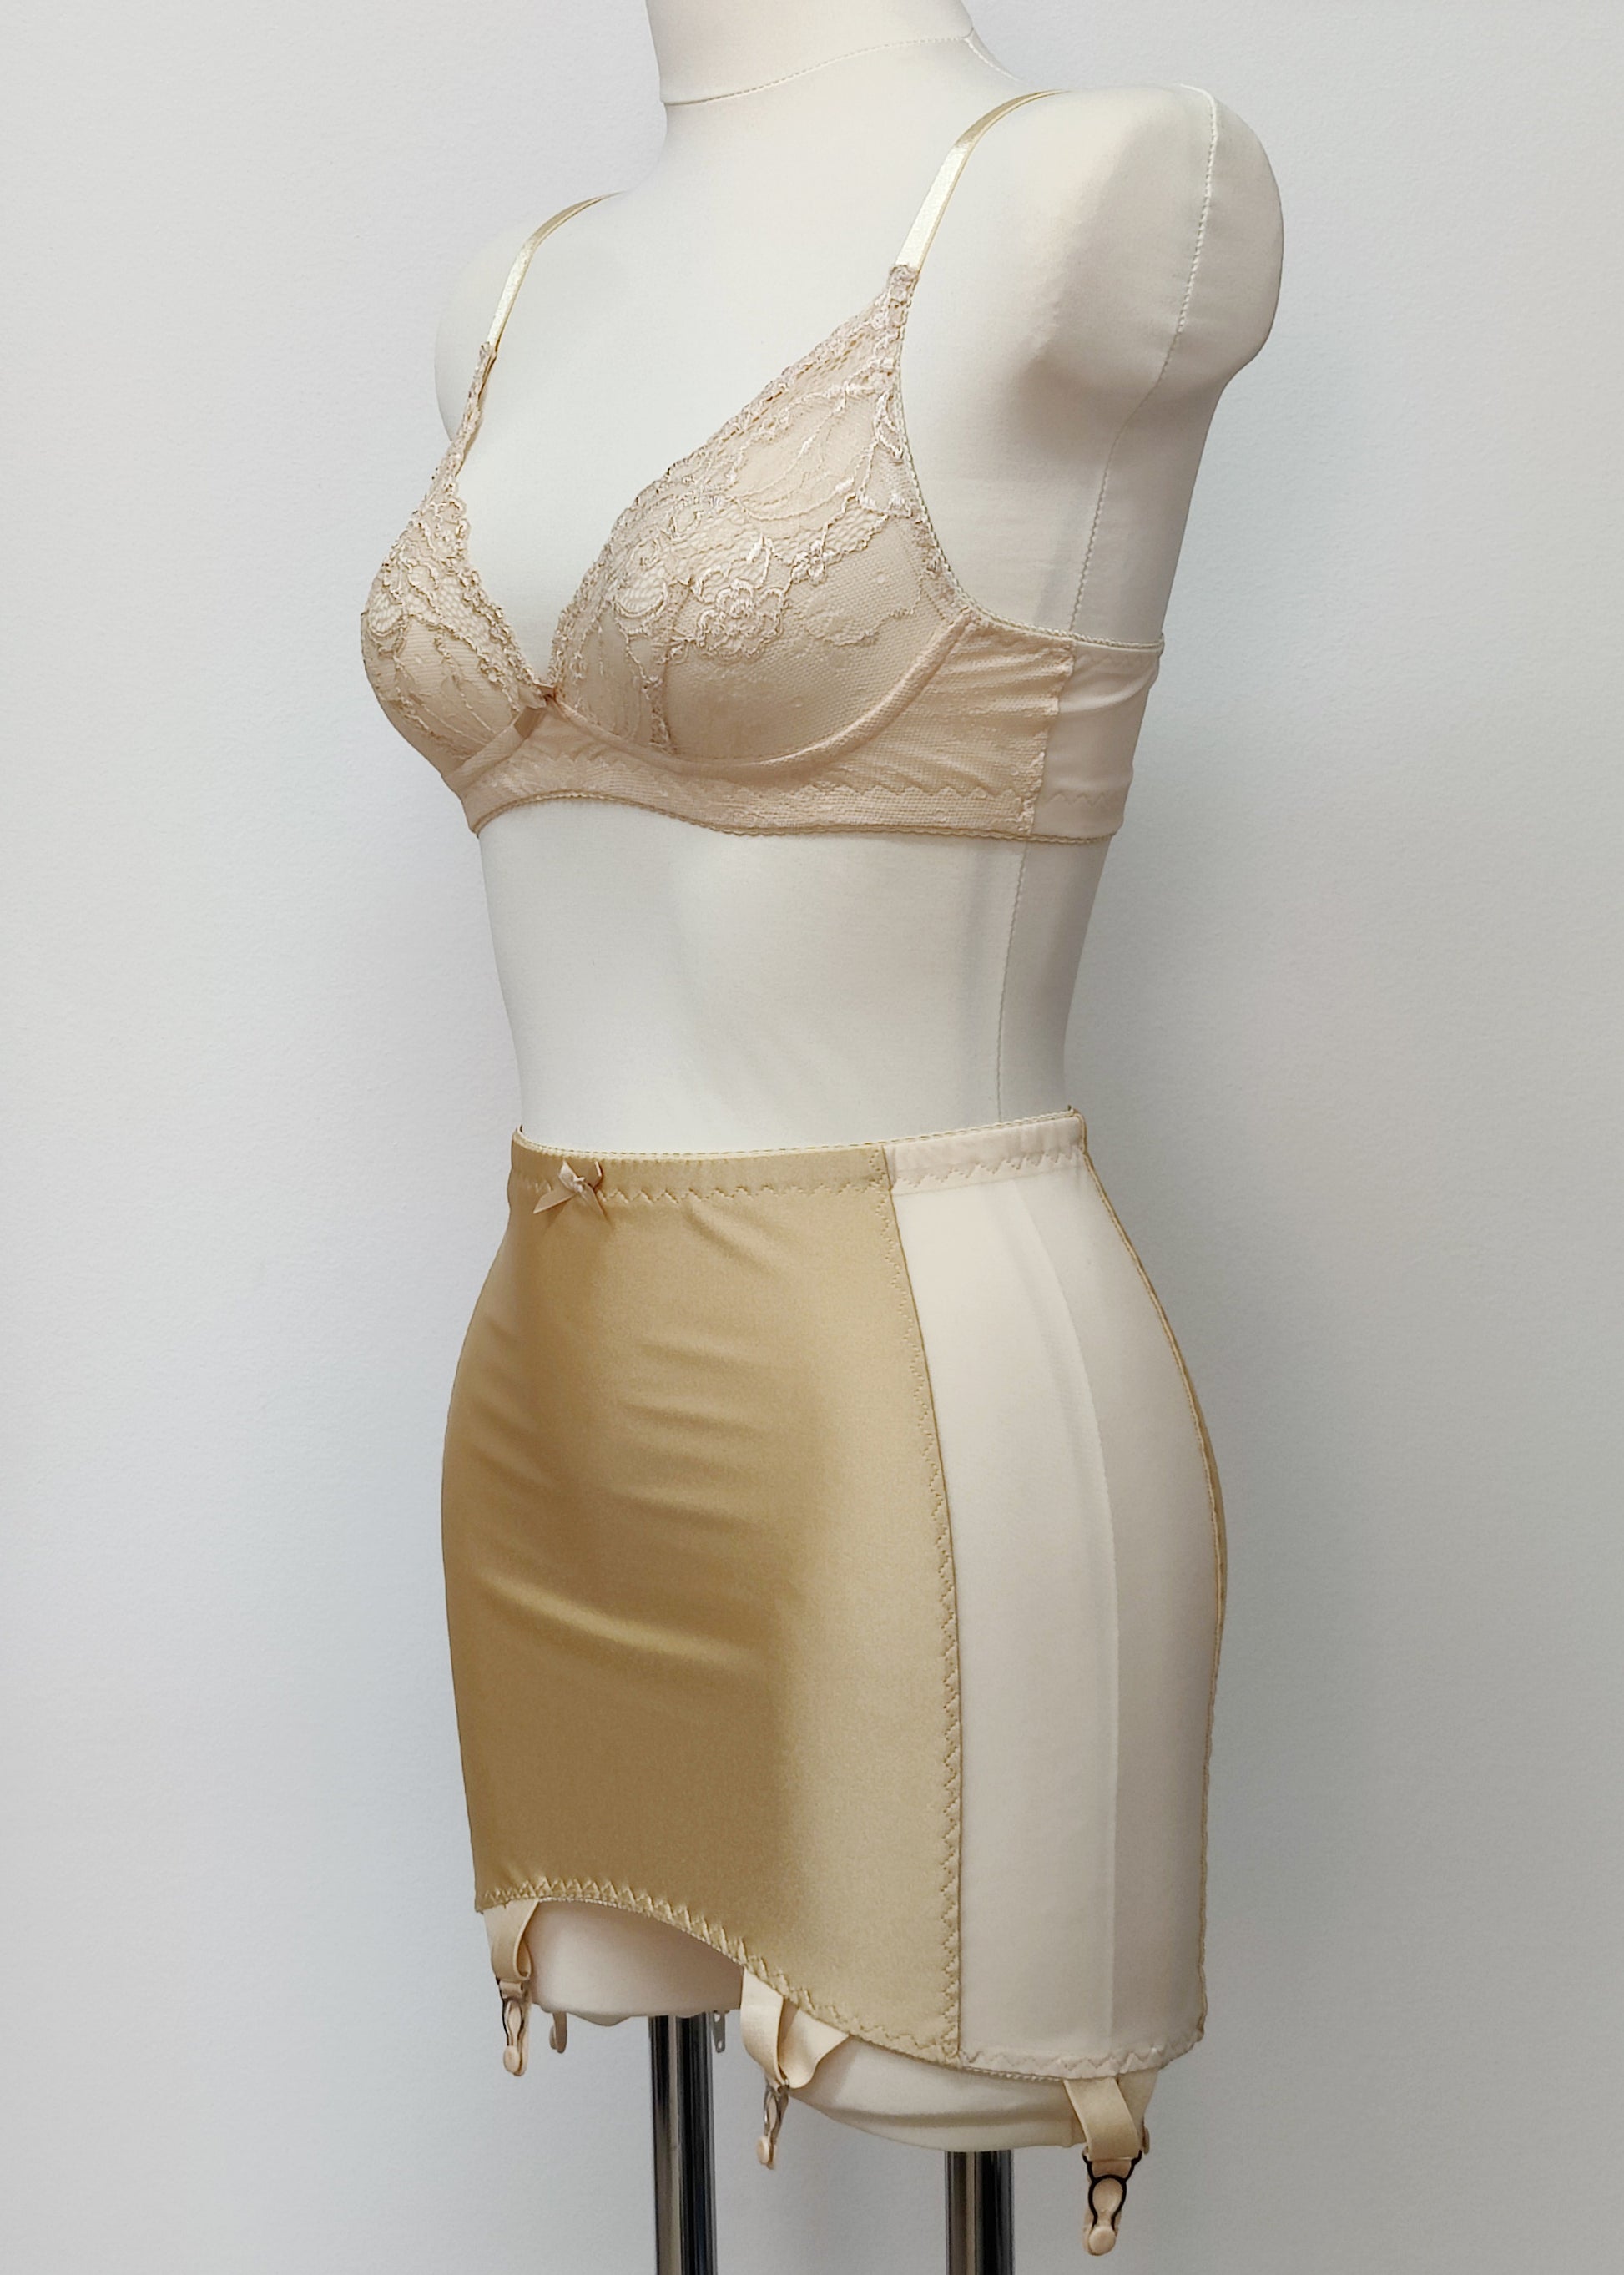 White High Waist Lace Up Front Open Bottom Girdle White Bra and